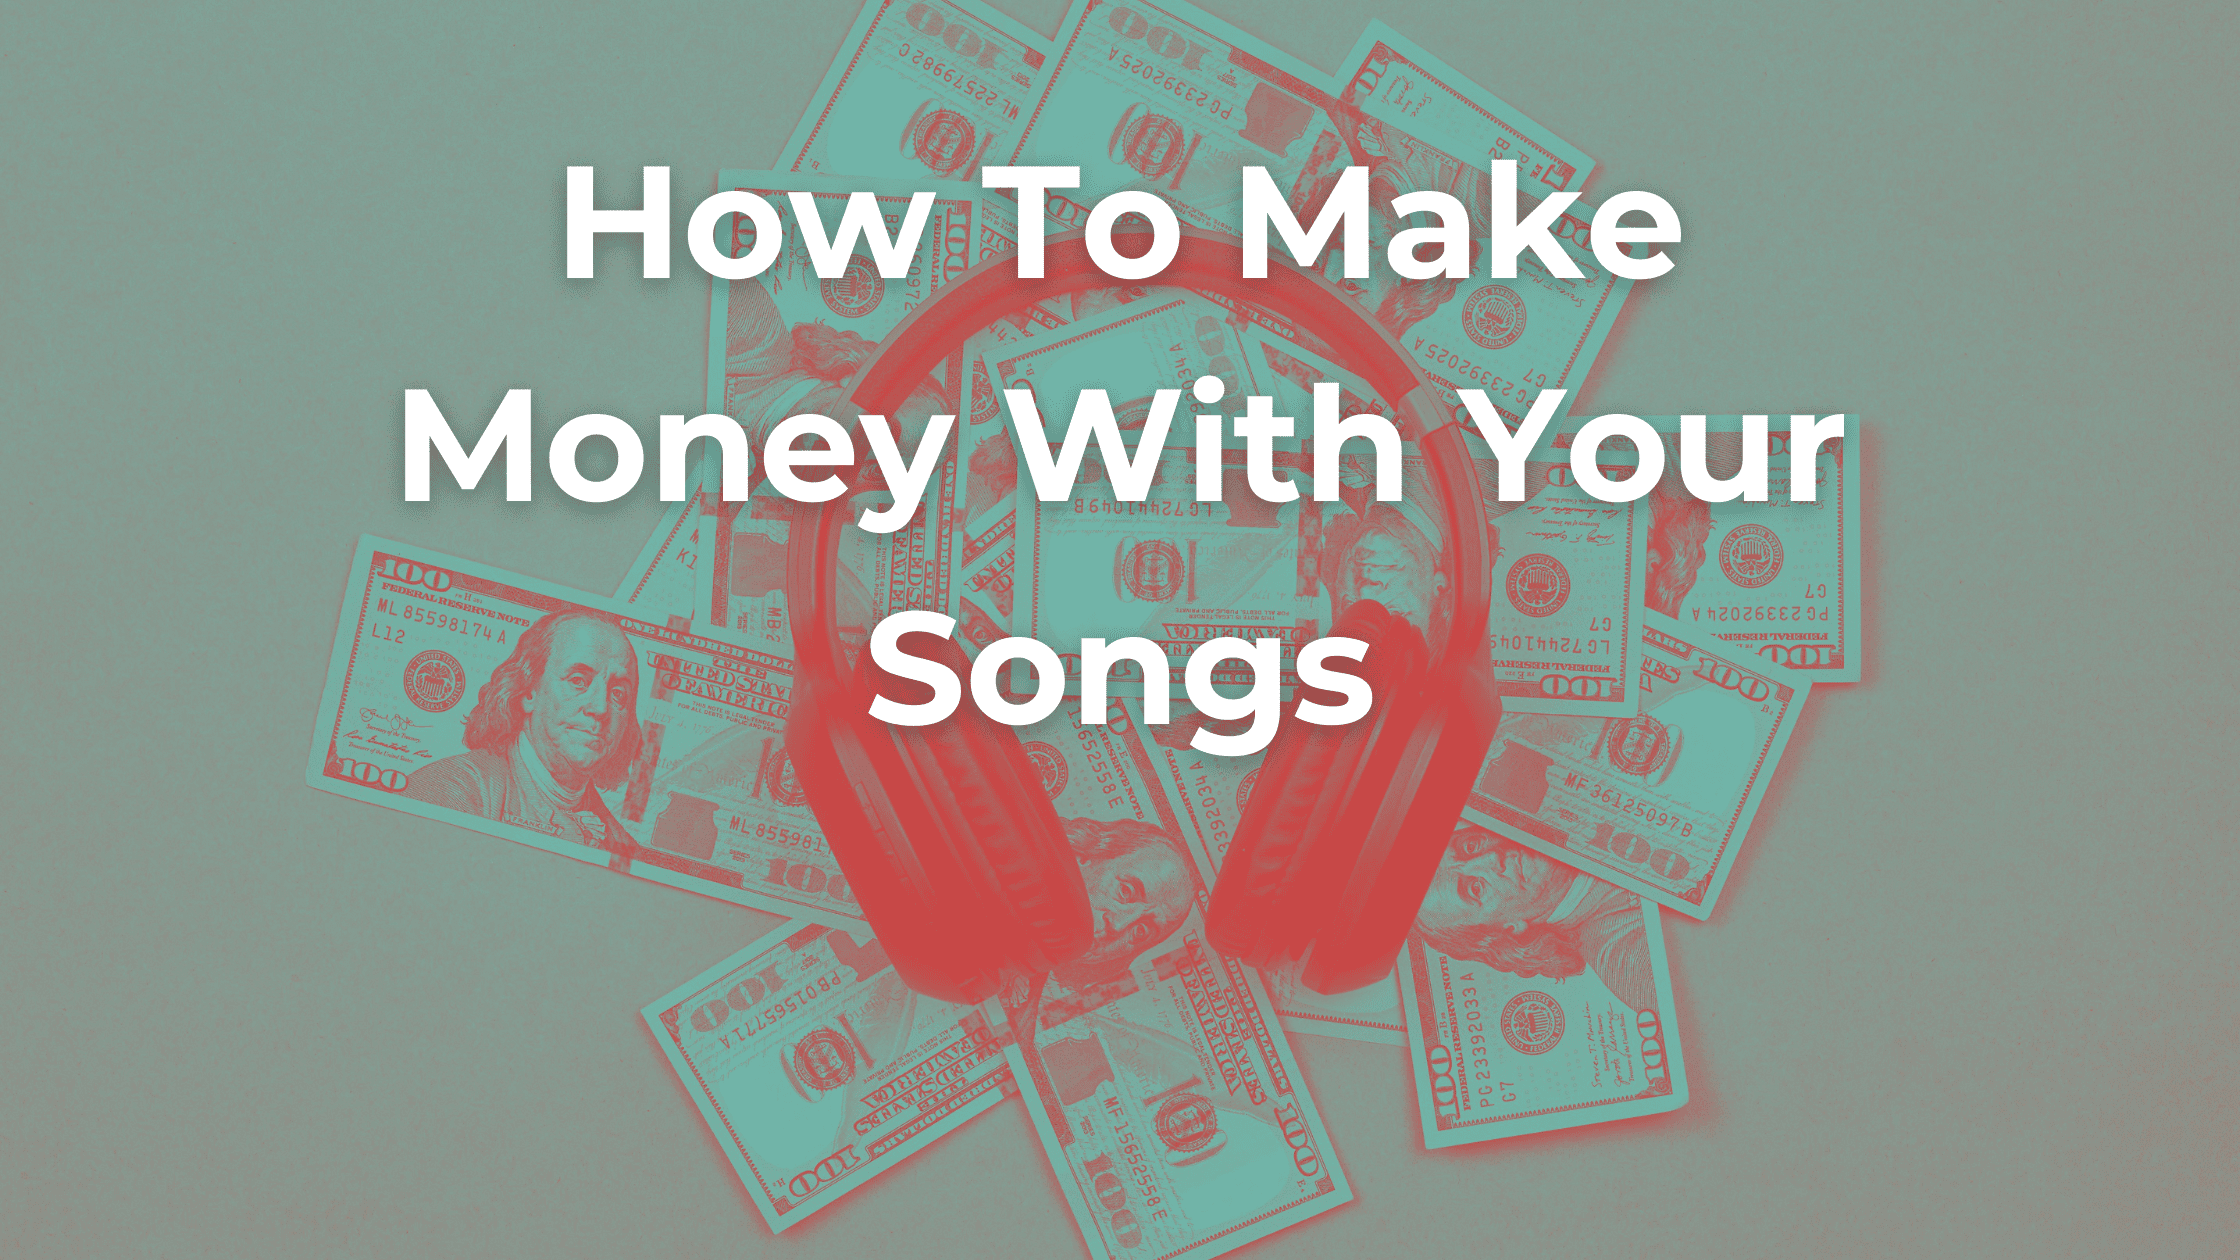 How To Make Money With Your Songs - SongShop